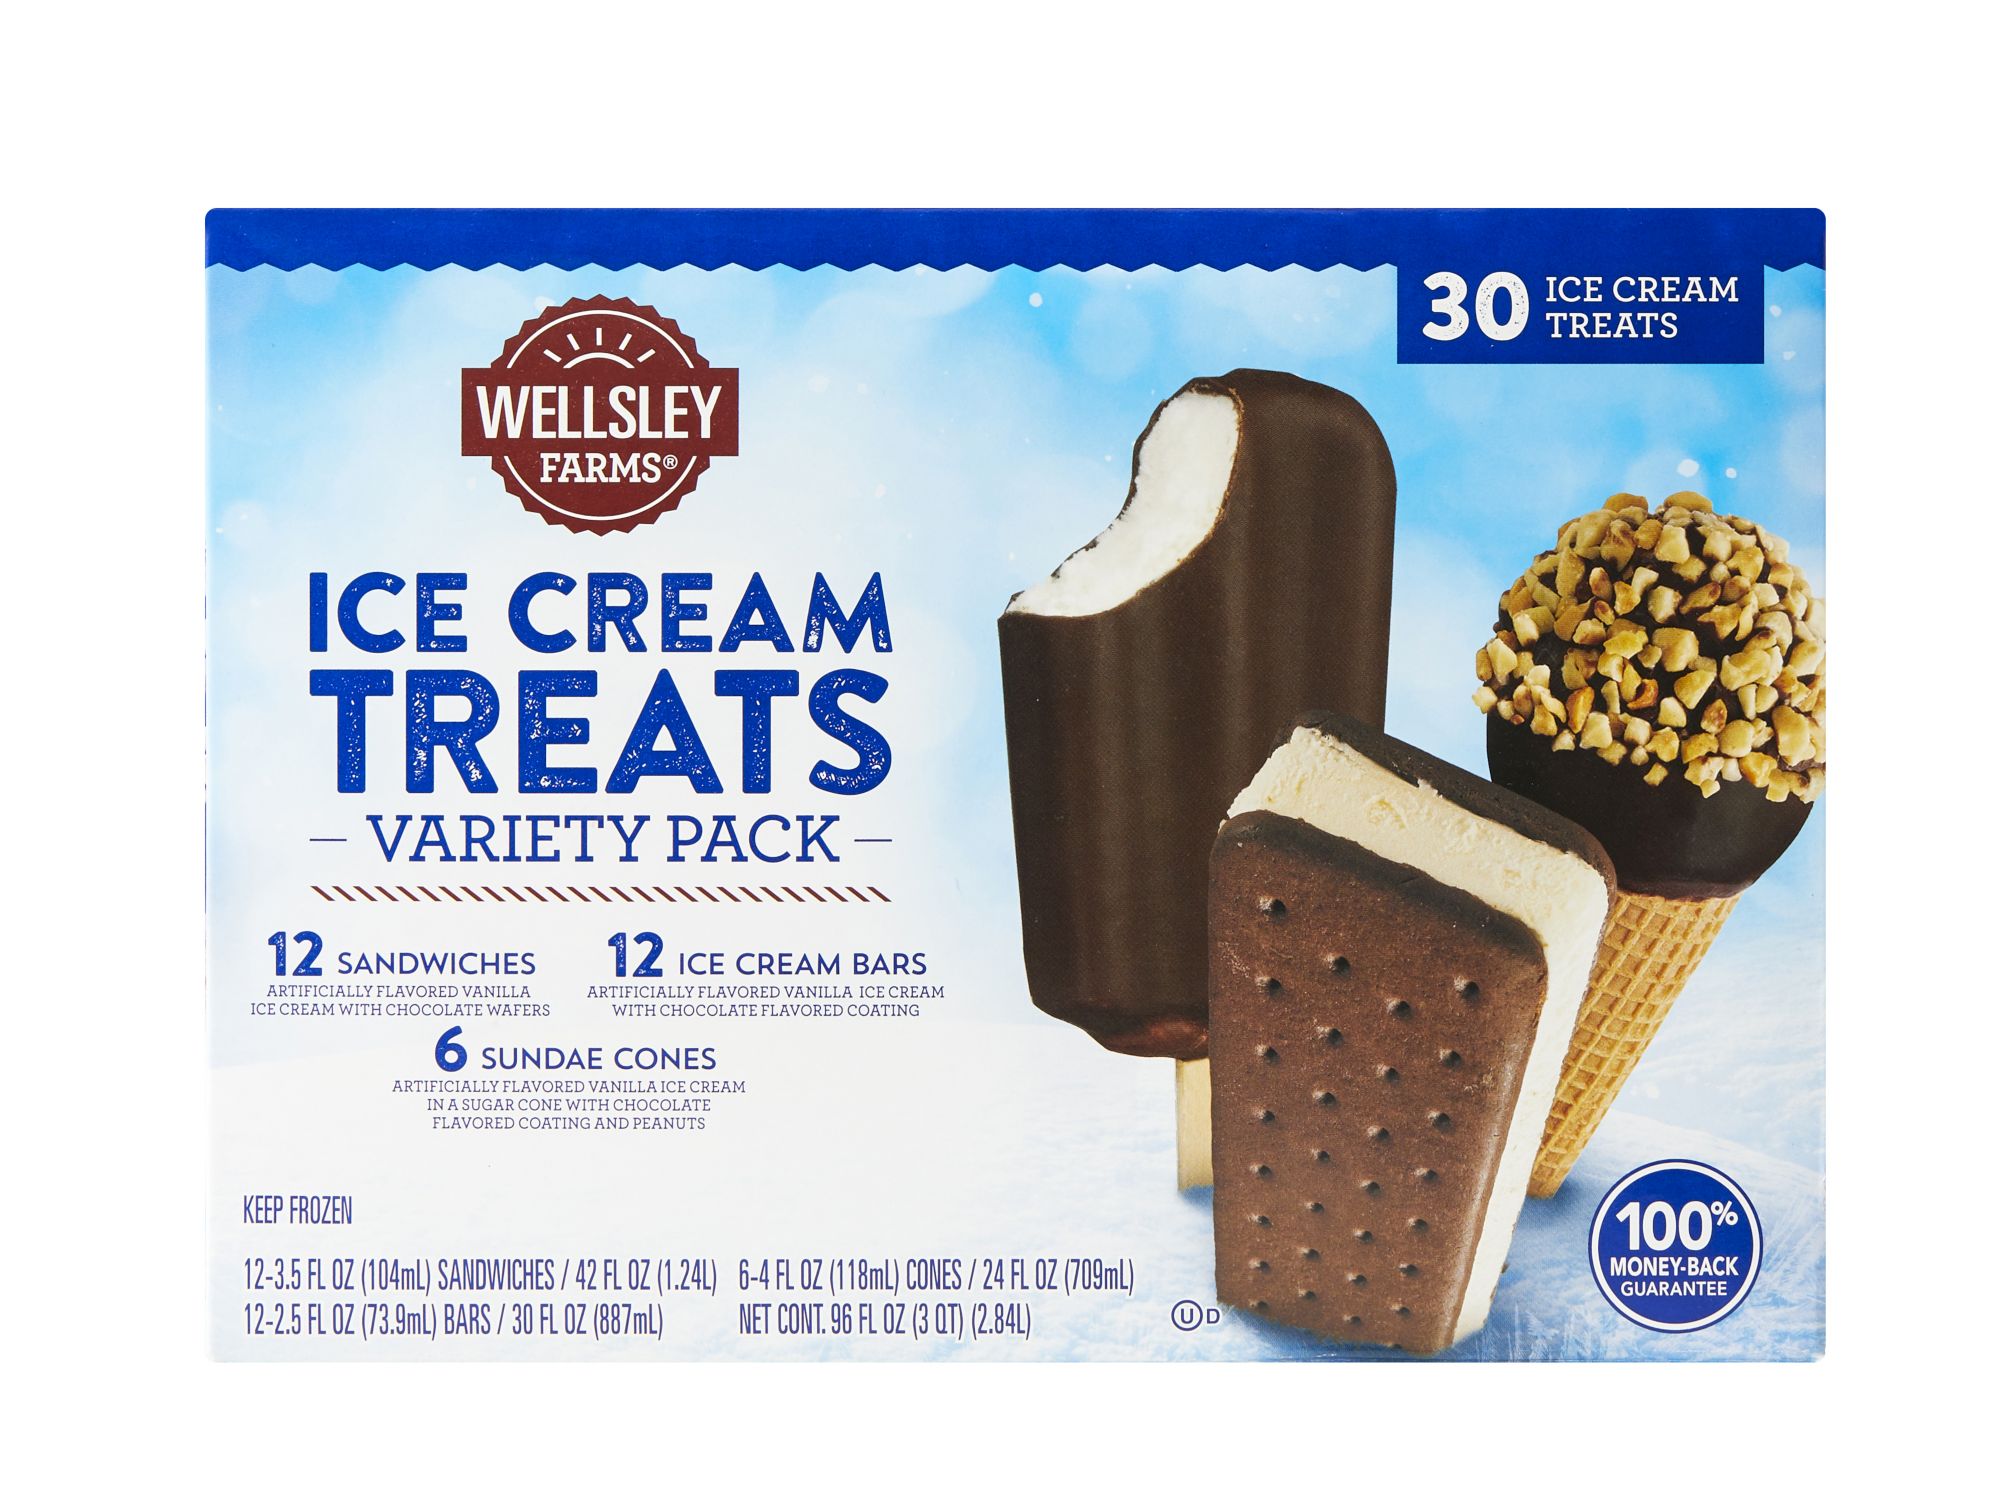 Wholesale ice cream display freeze to Offer A Cool Space for Storing 